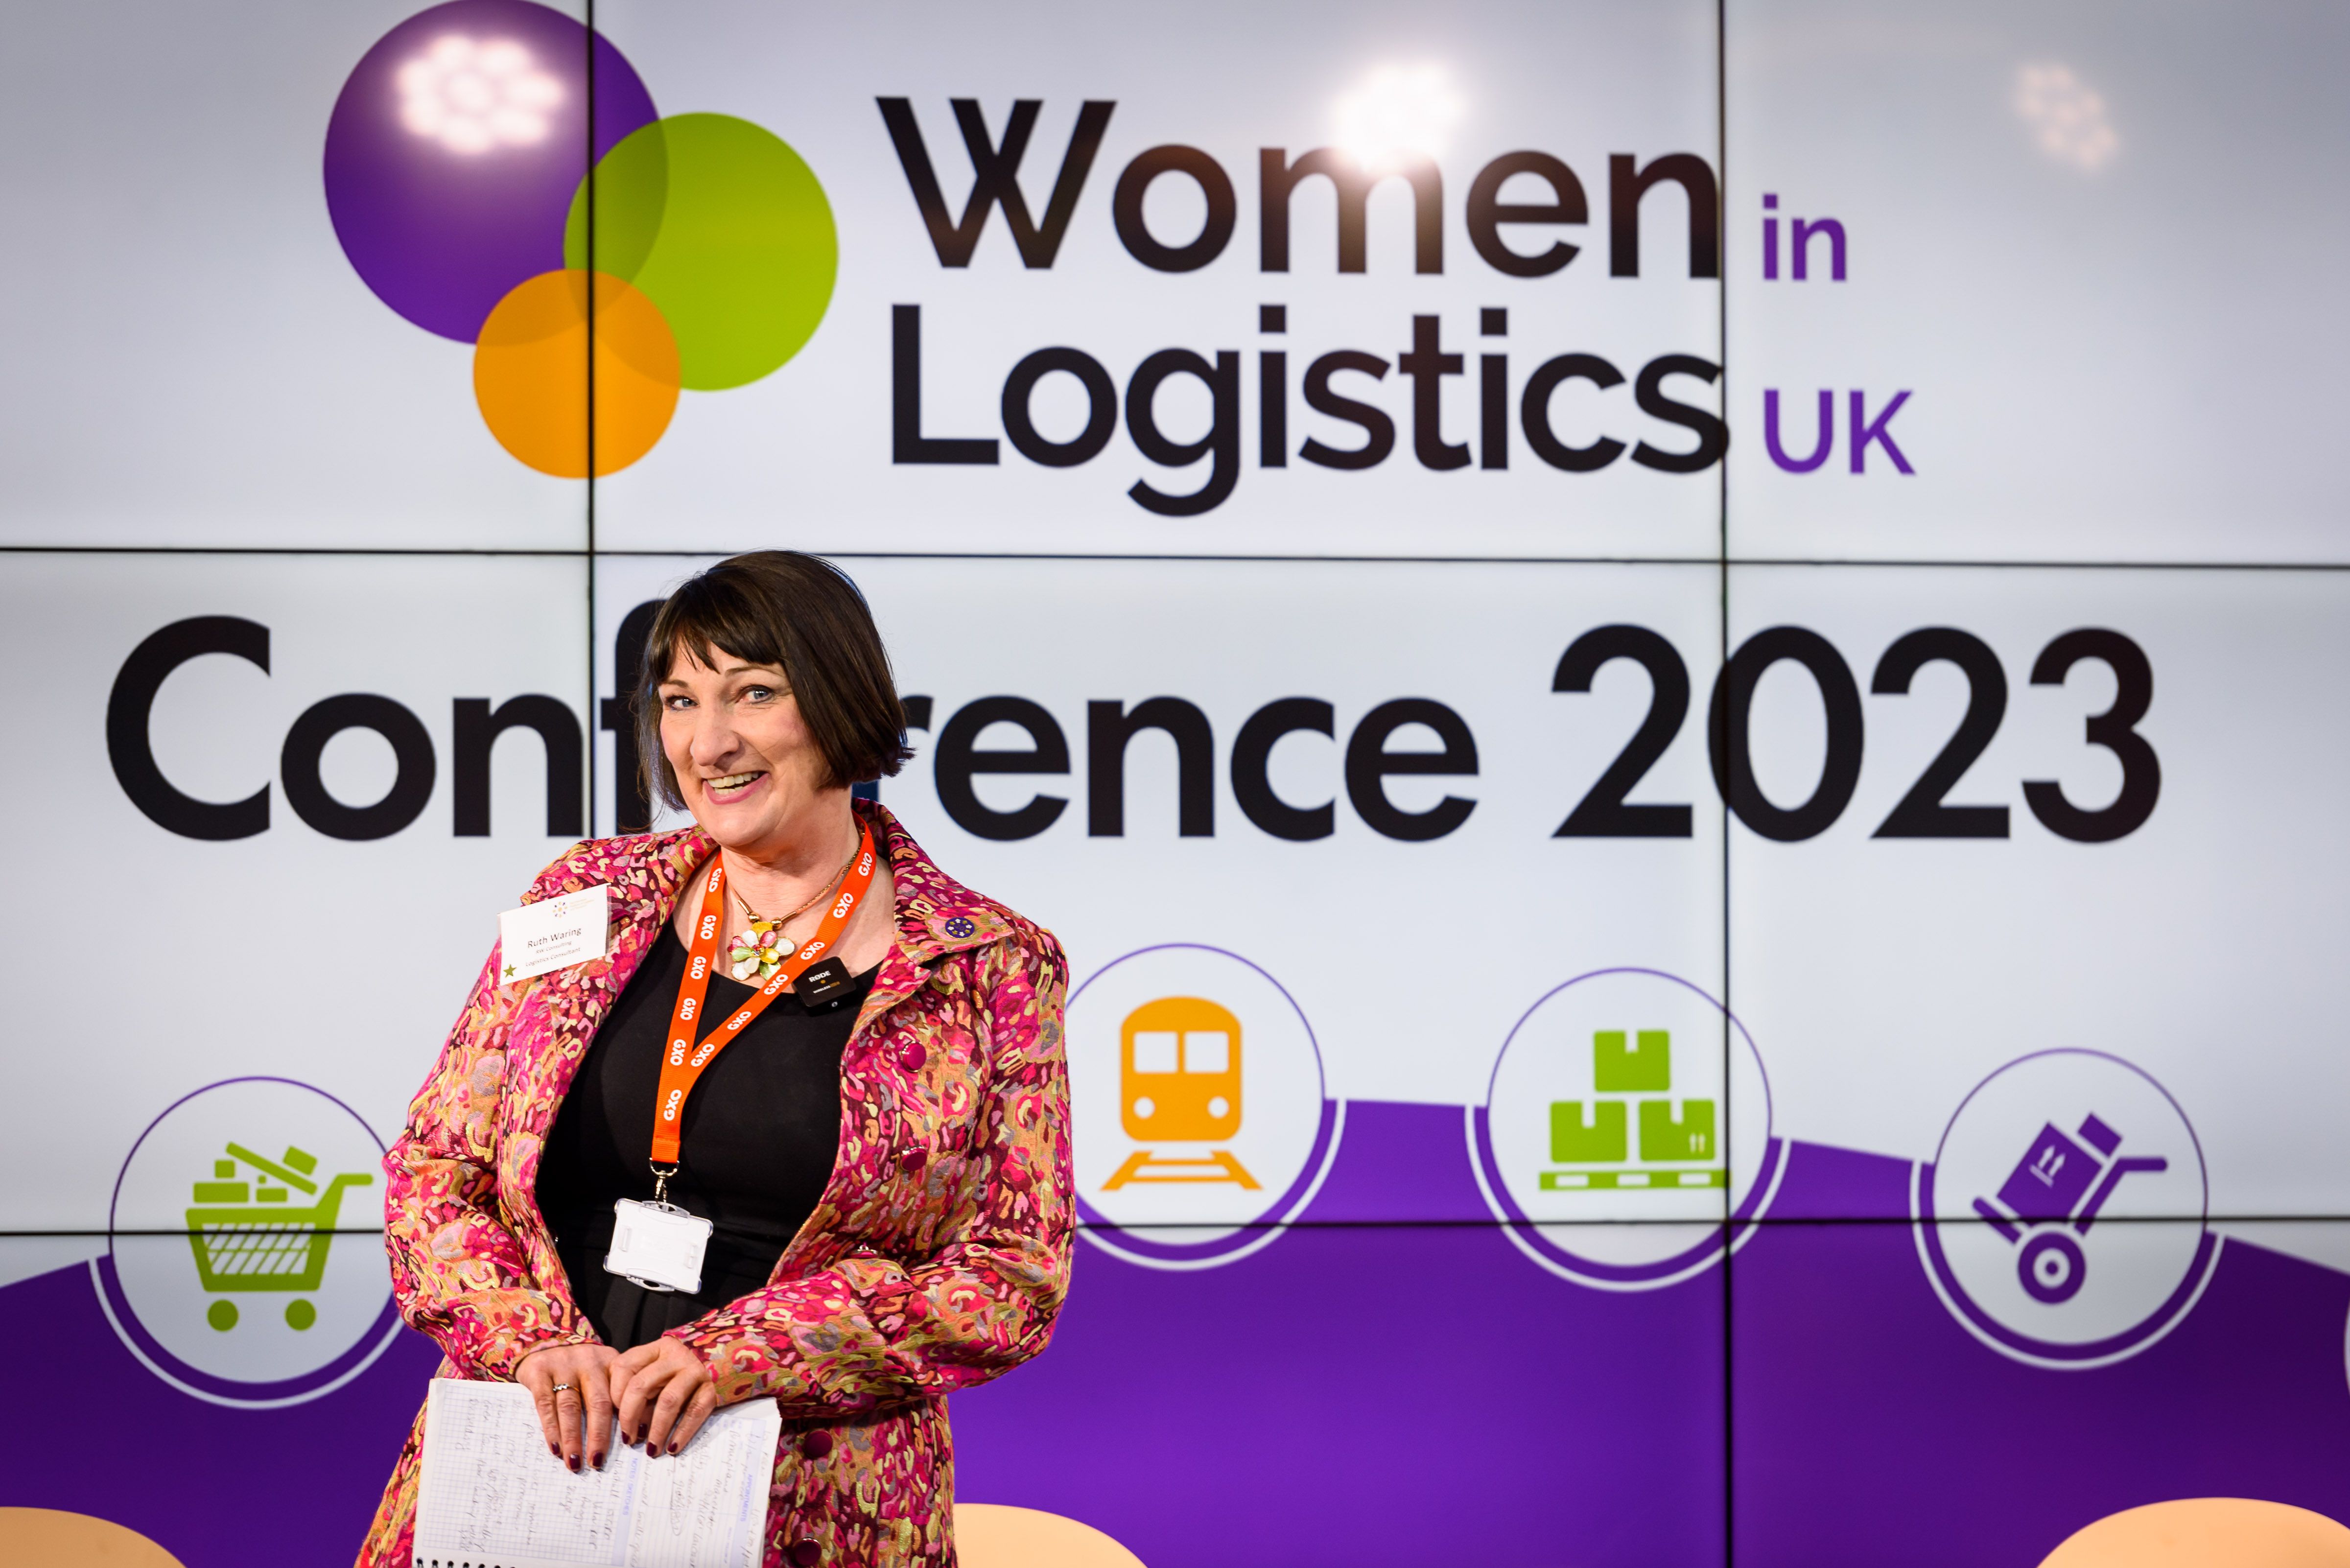 Ruth Waring pictured in front of 2023 Women in Logistics UK Conference logo